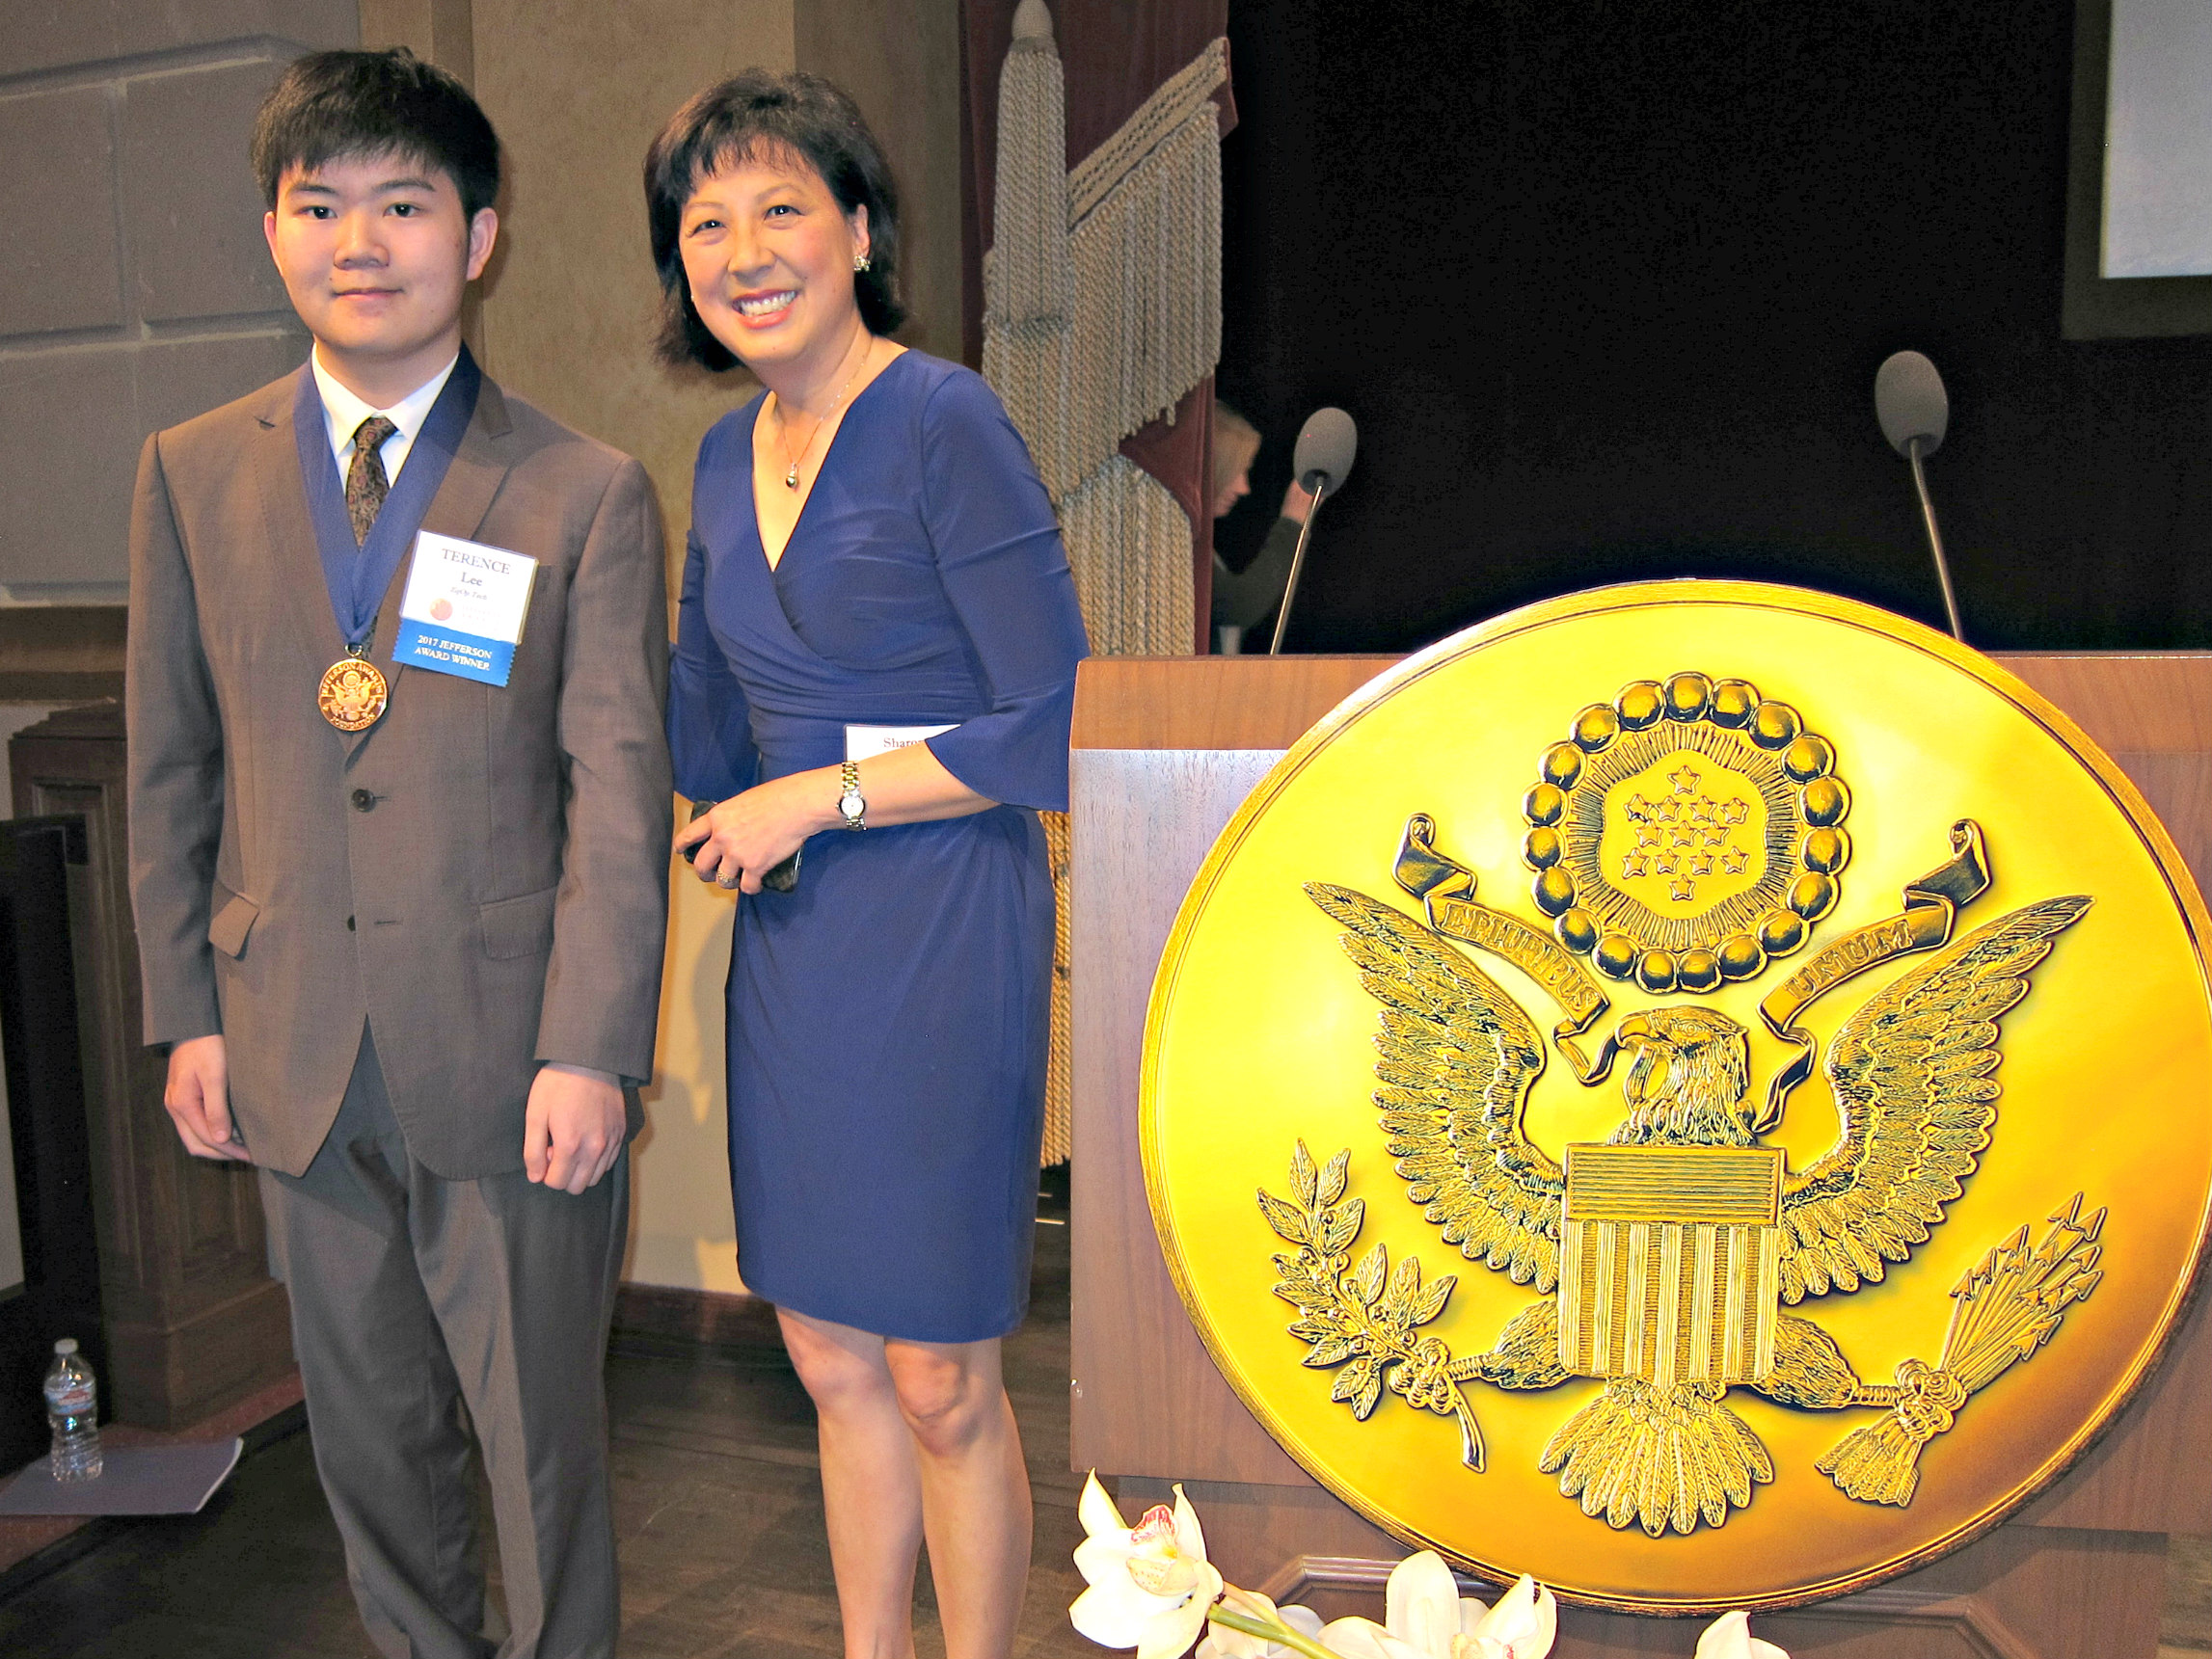 Terence Lee (left) and Sharon Chin, CBS KPIX